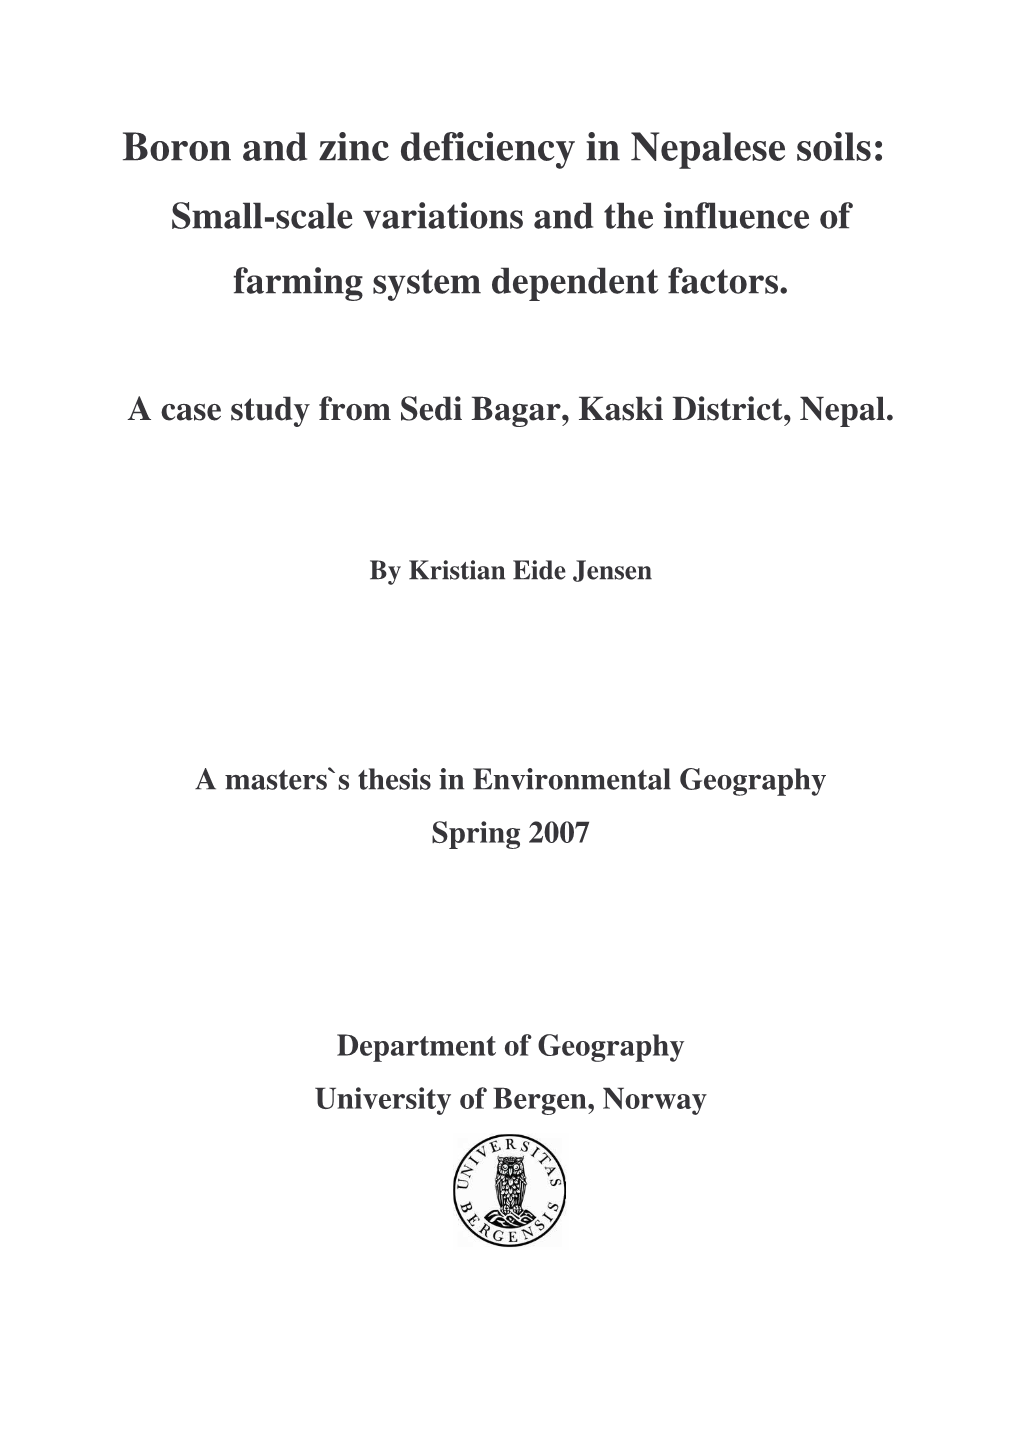 Boron and Zinc Deficiency in Nepalese Soils: Small-Scale Variations and the Influence of Farming System Dependent Factors